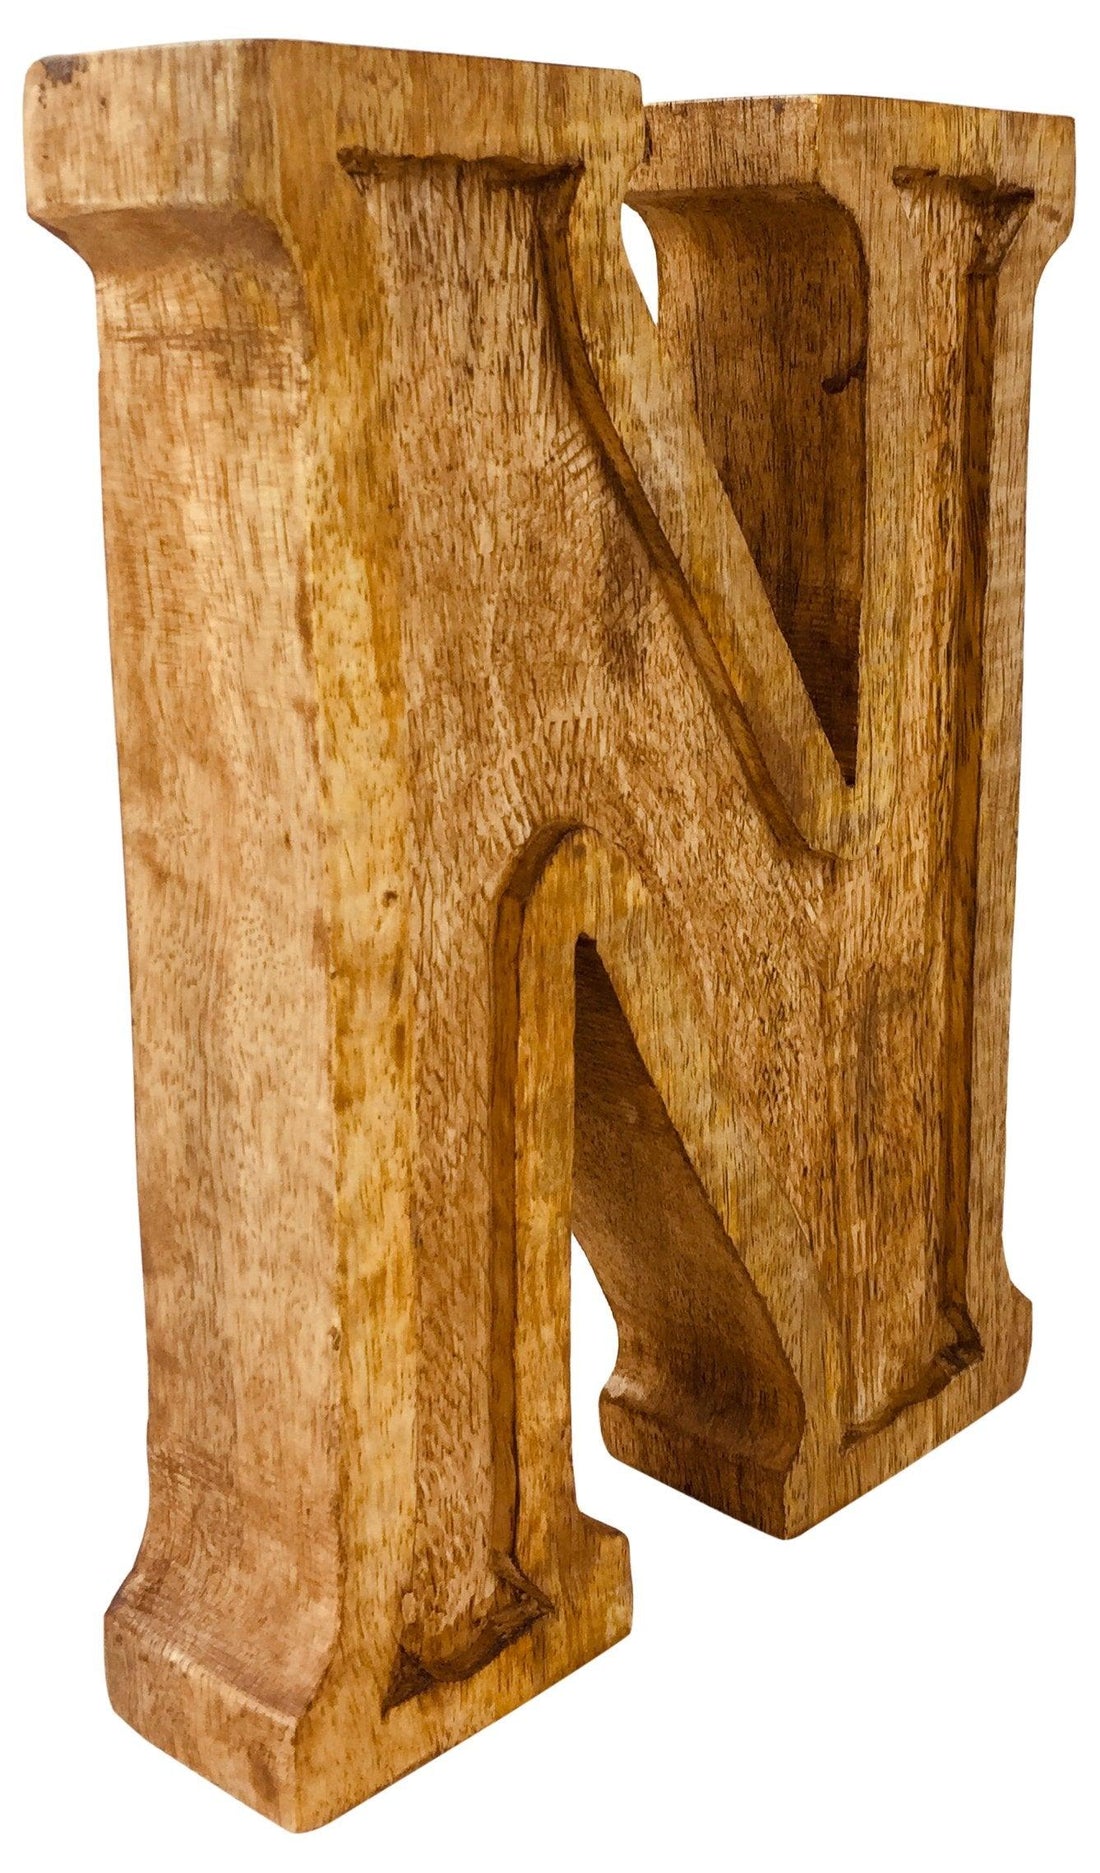 Hand Carved Wooden Embossed Letter N - £18.99 - Single Letters 